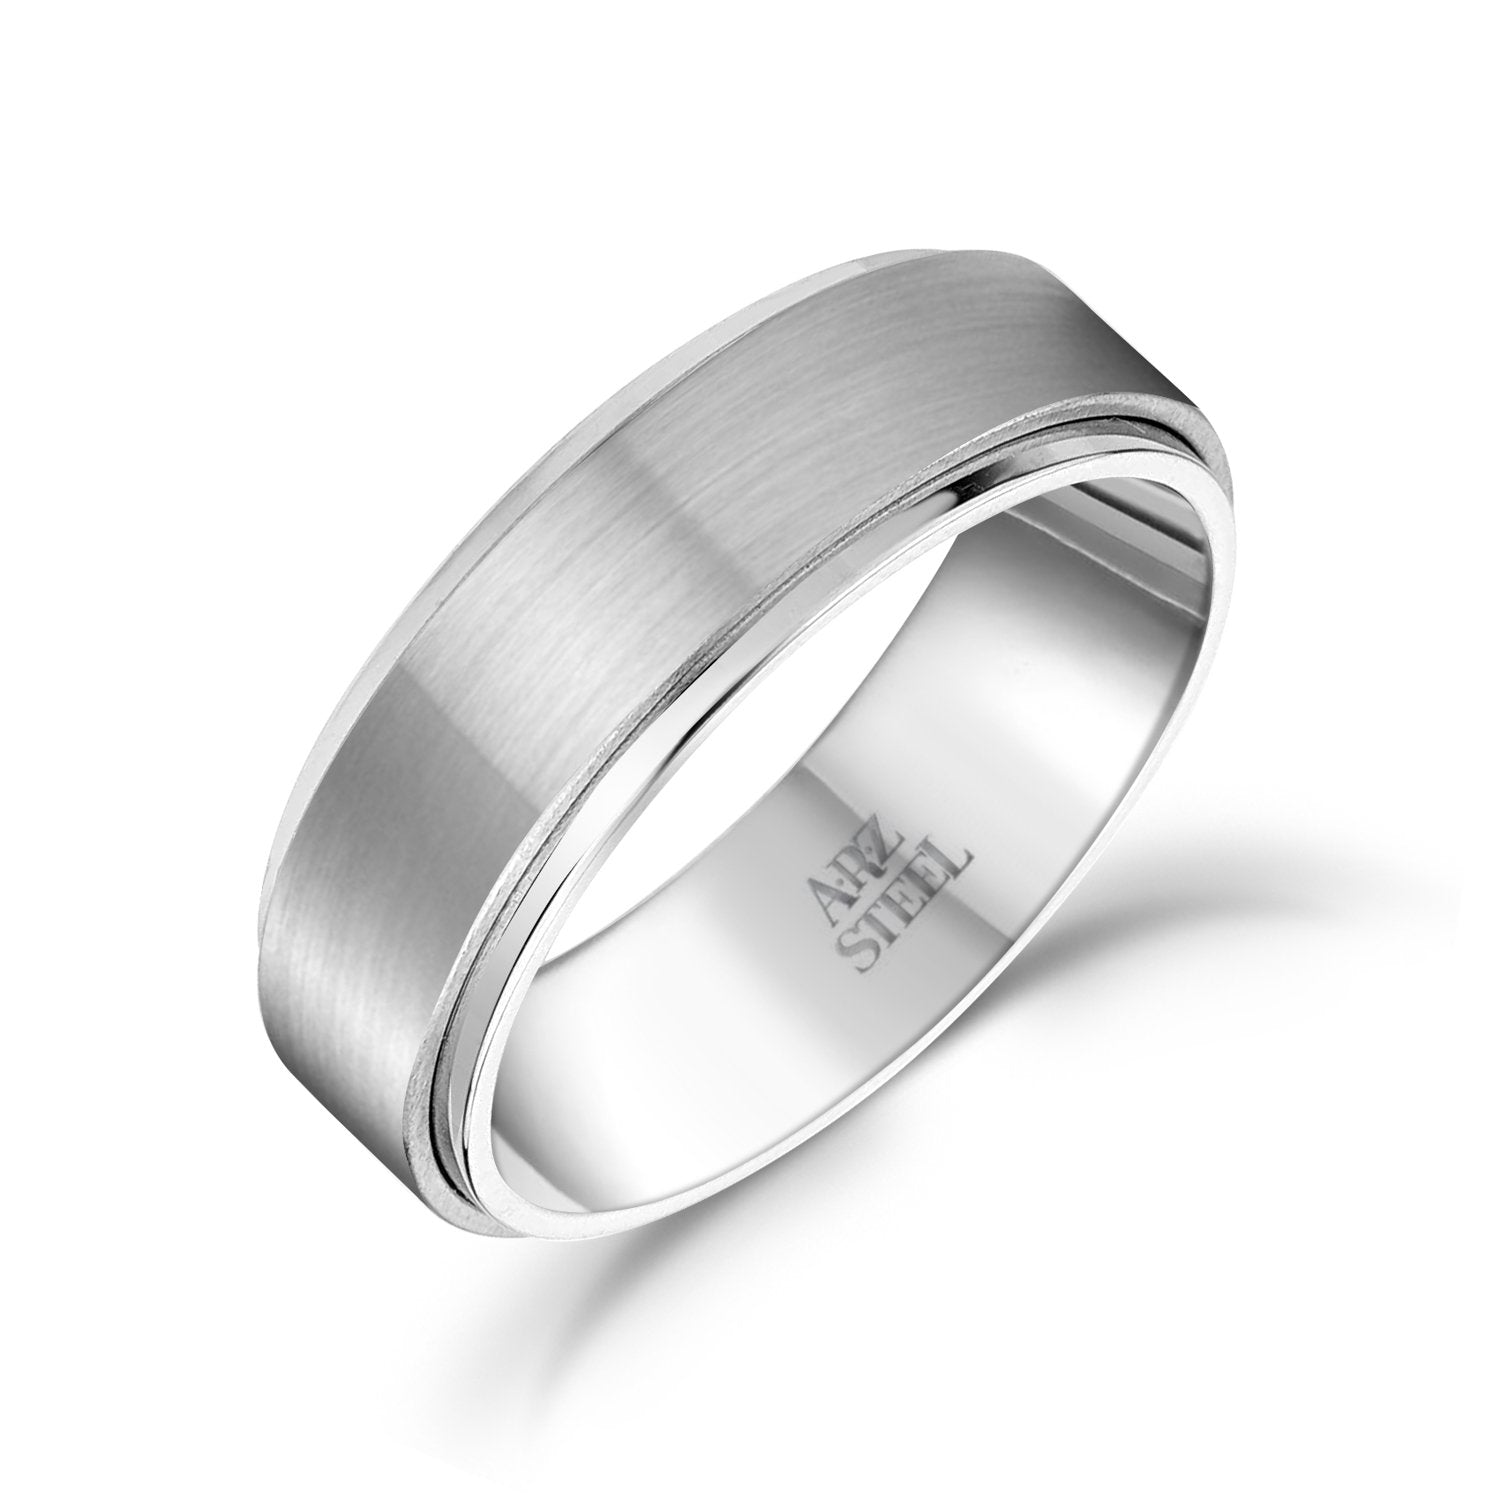 7mm personalized stainless steel wedding band mens – The Steel Shop